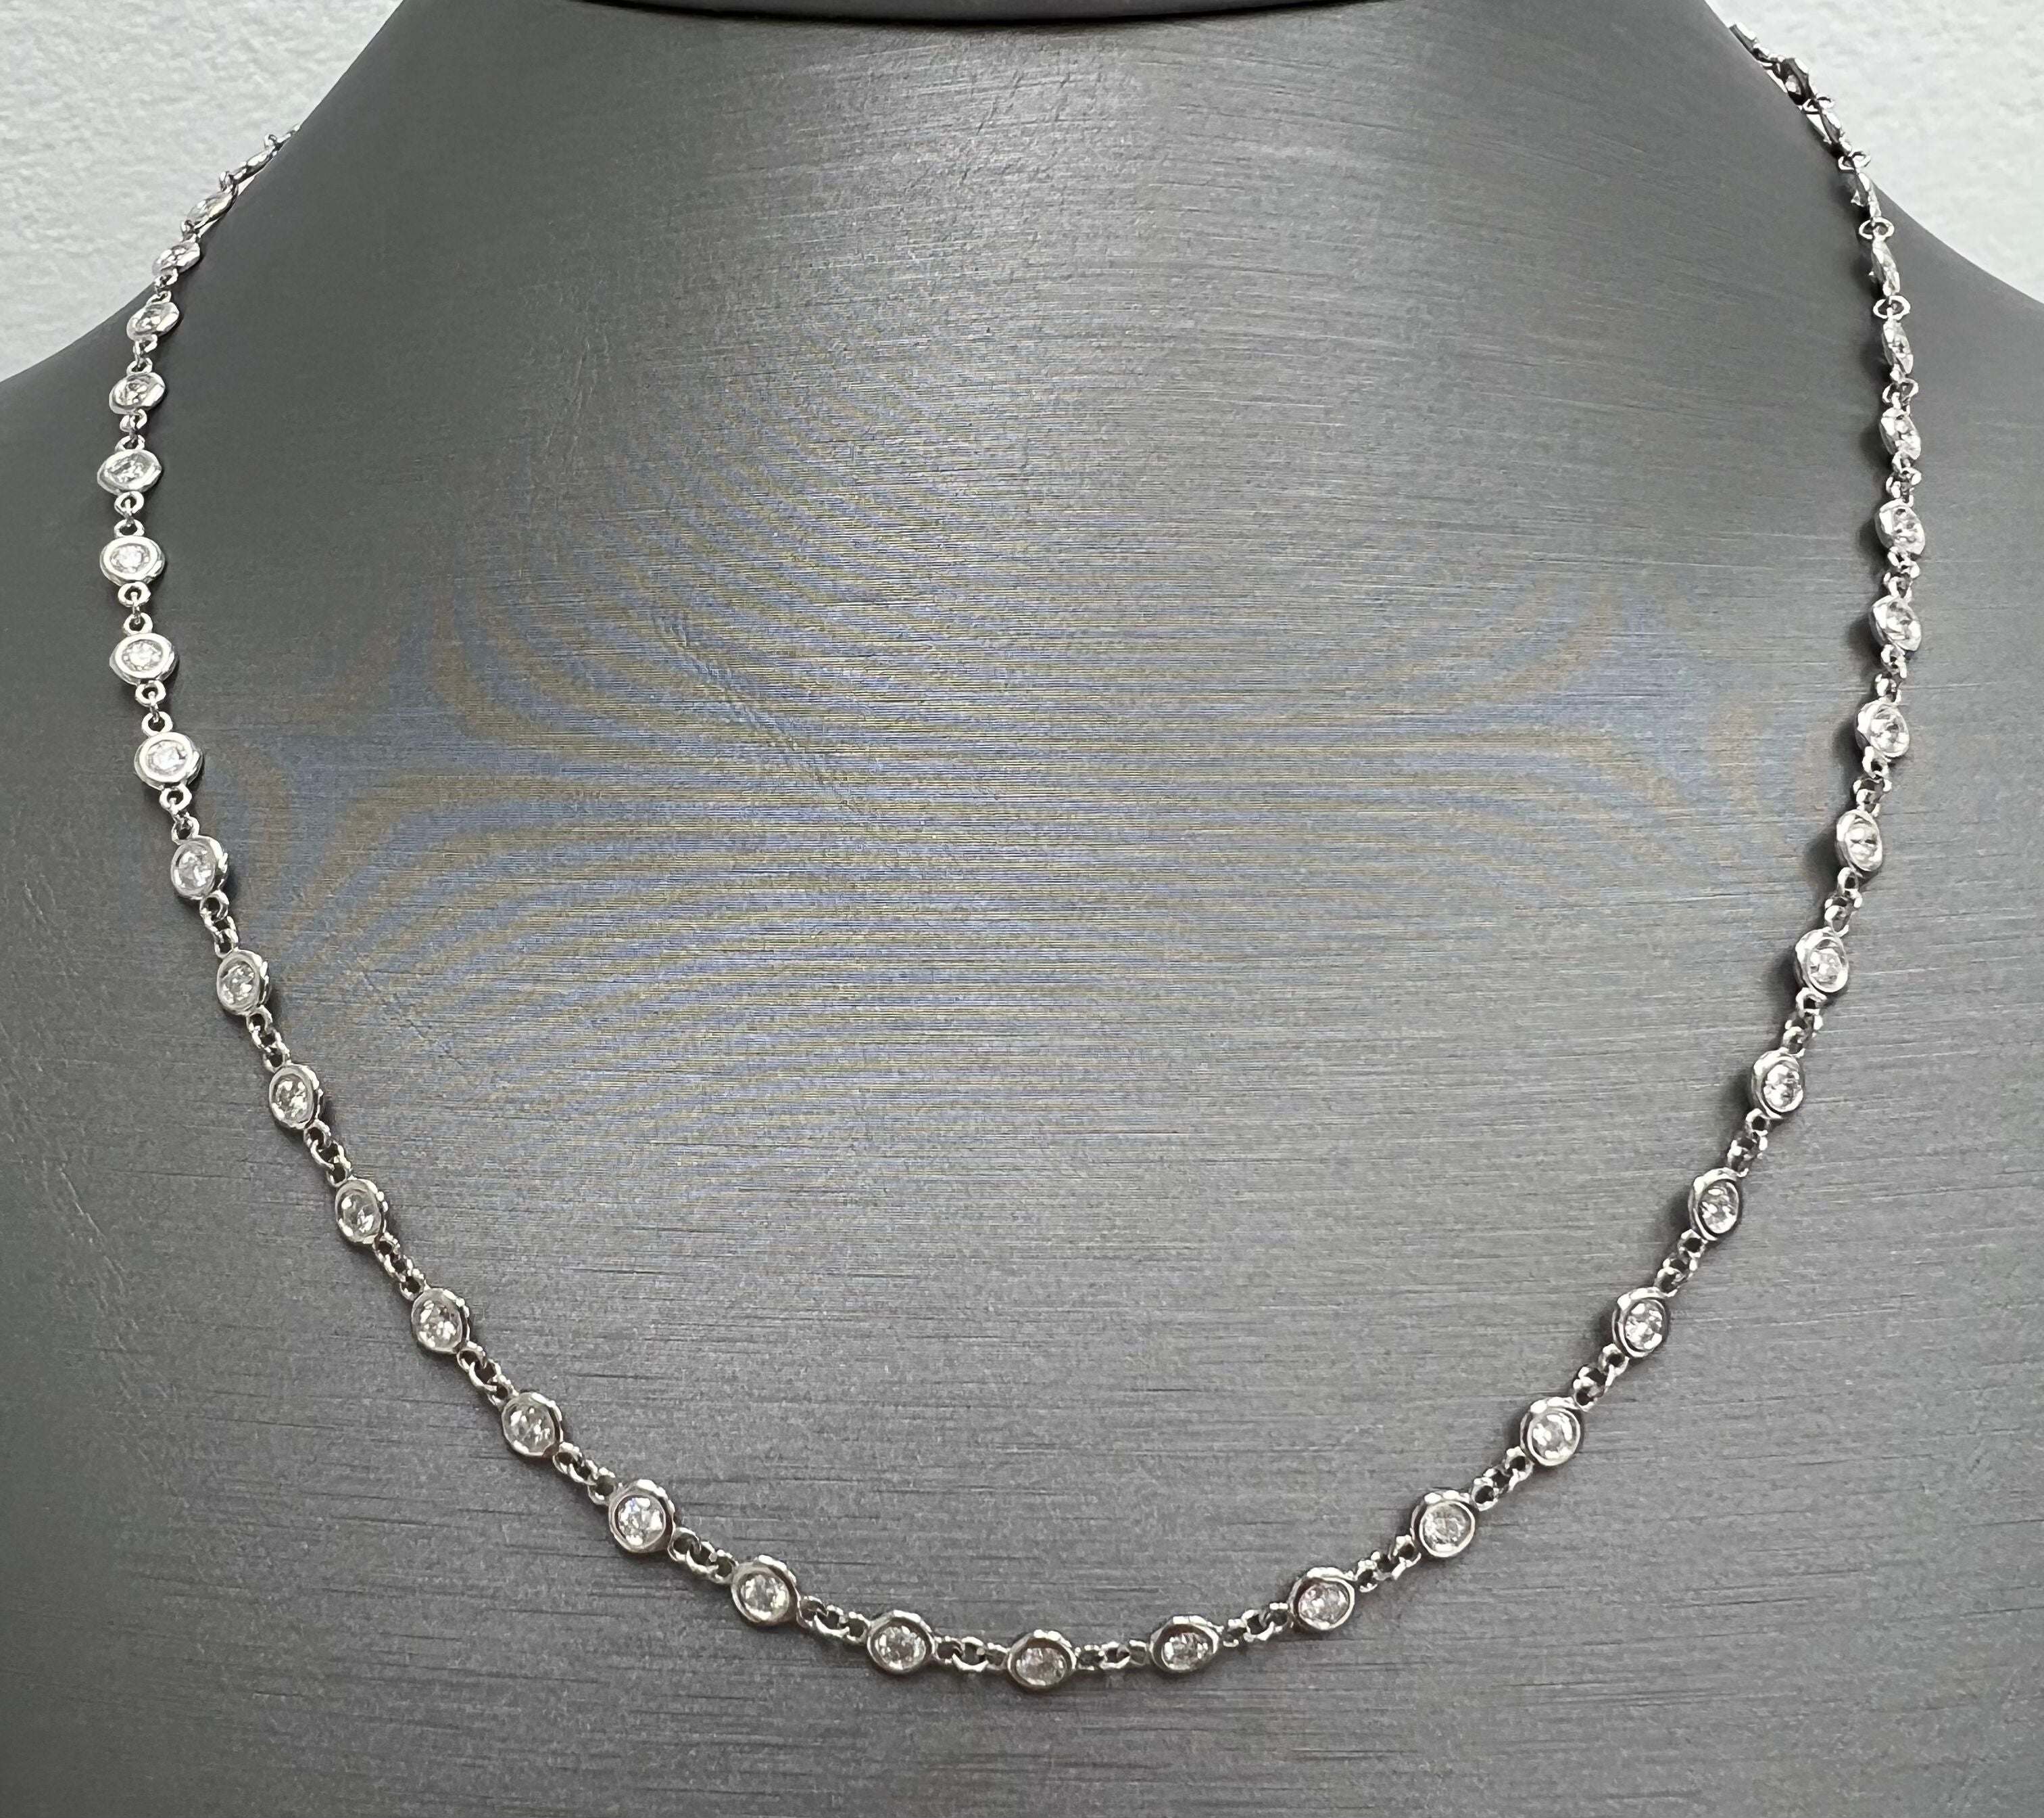 Diamonds by the Yard Necklace, 59 Full Cut Natural Diamonds, 3.00 Total Carats